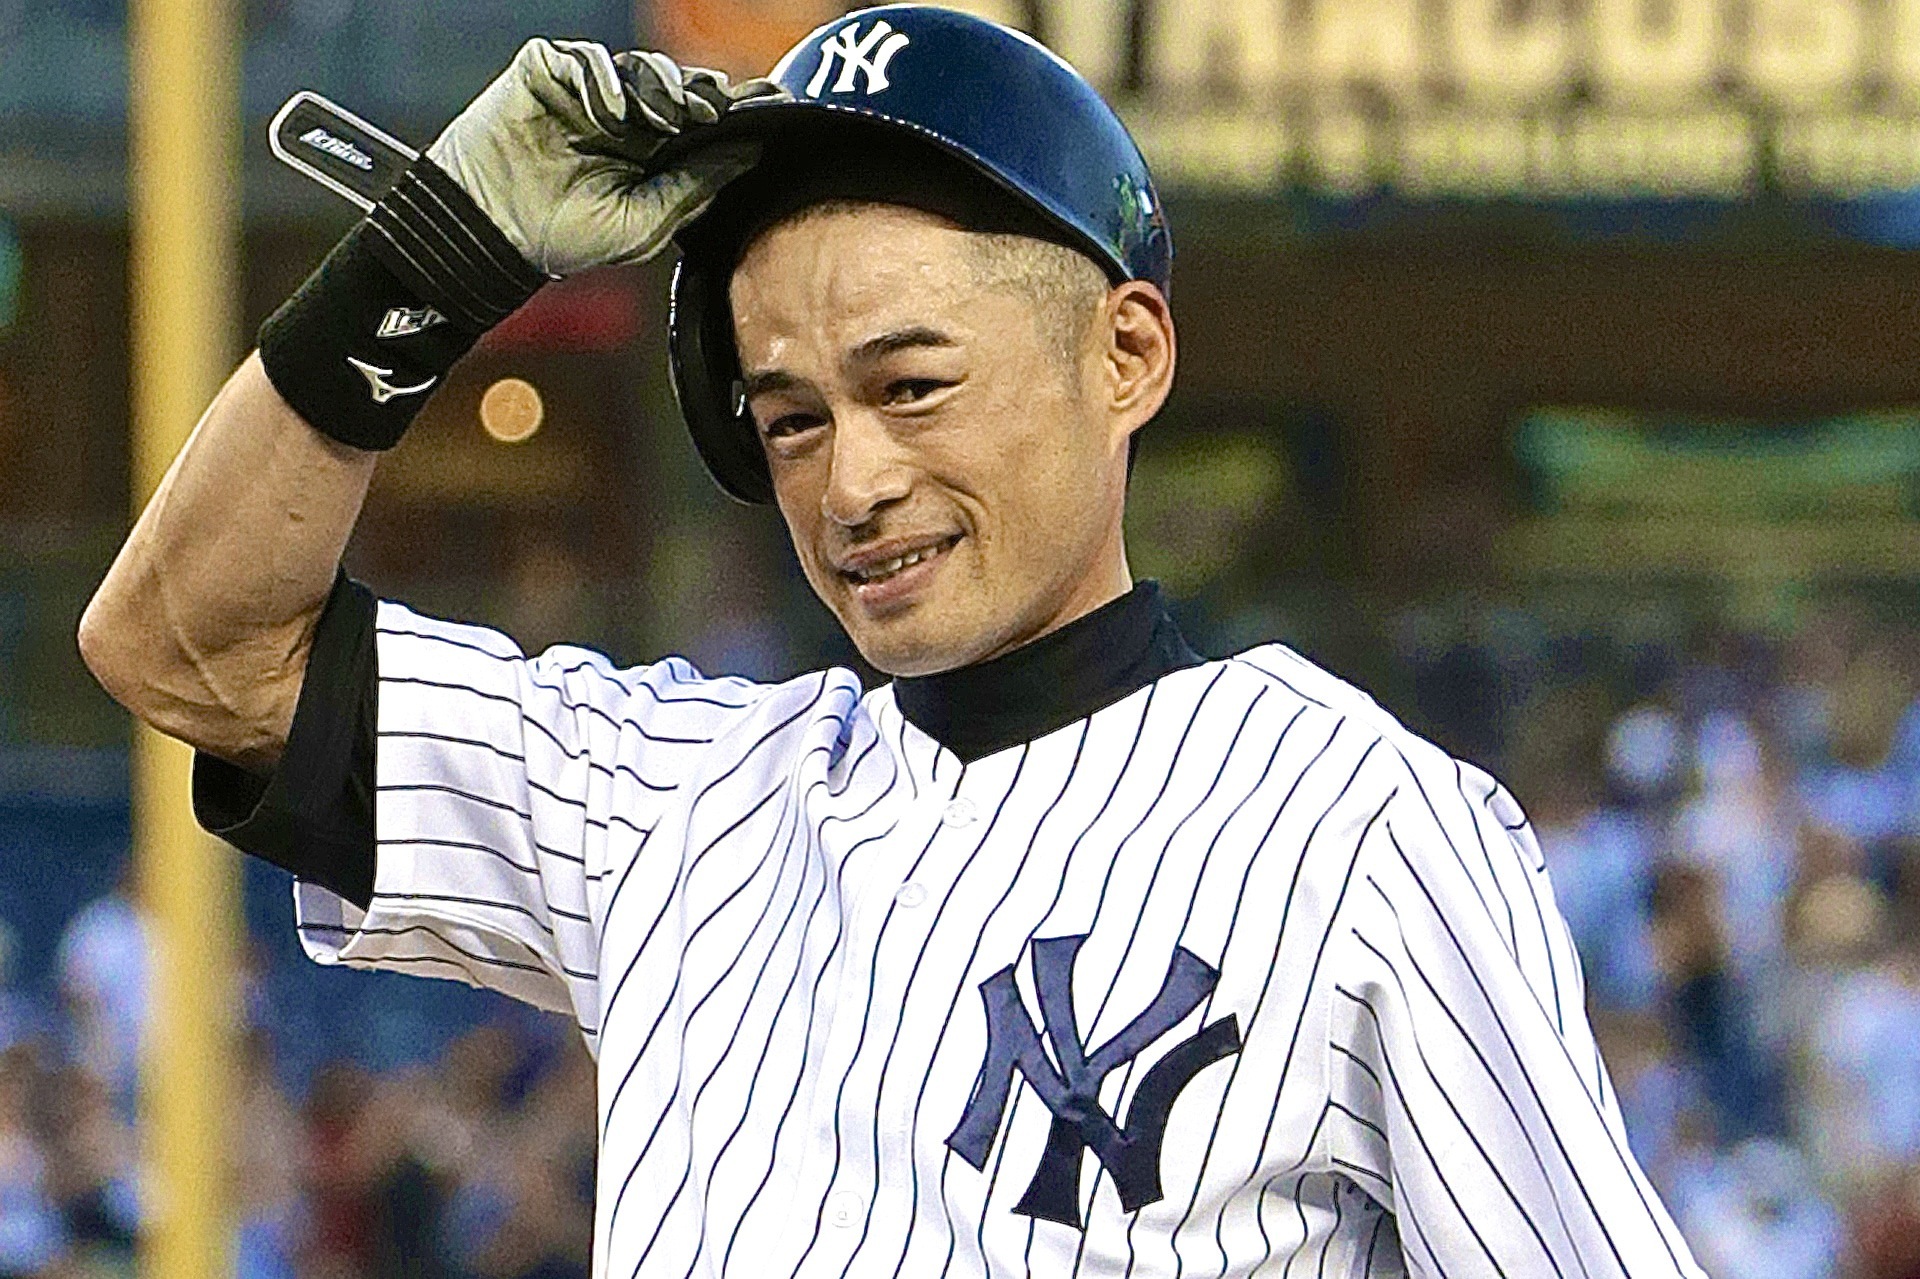 Ichiro takes field with 45,000 voices in full support